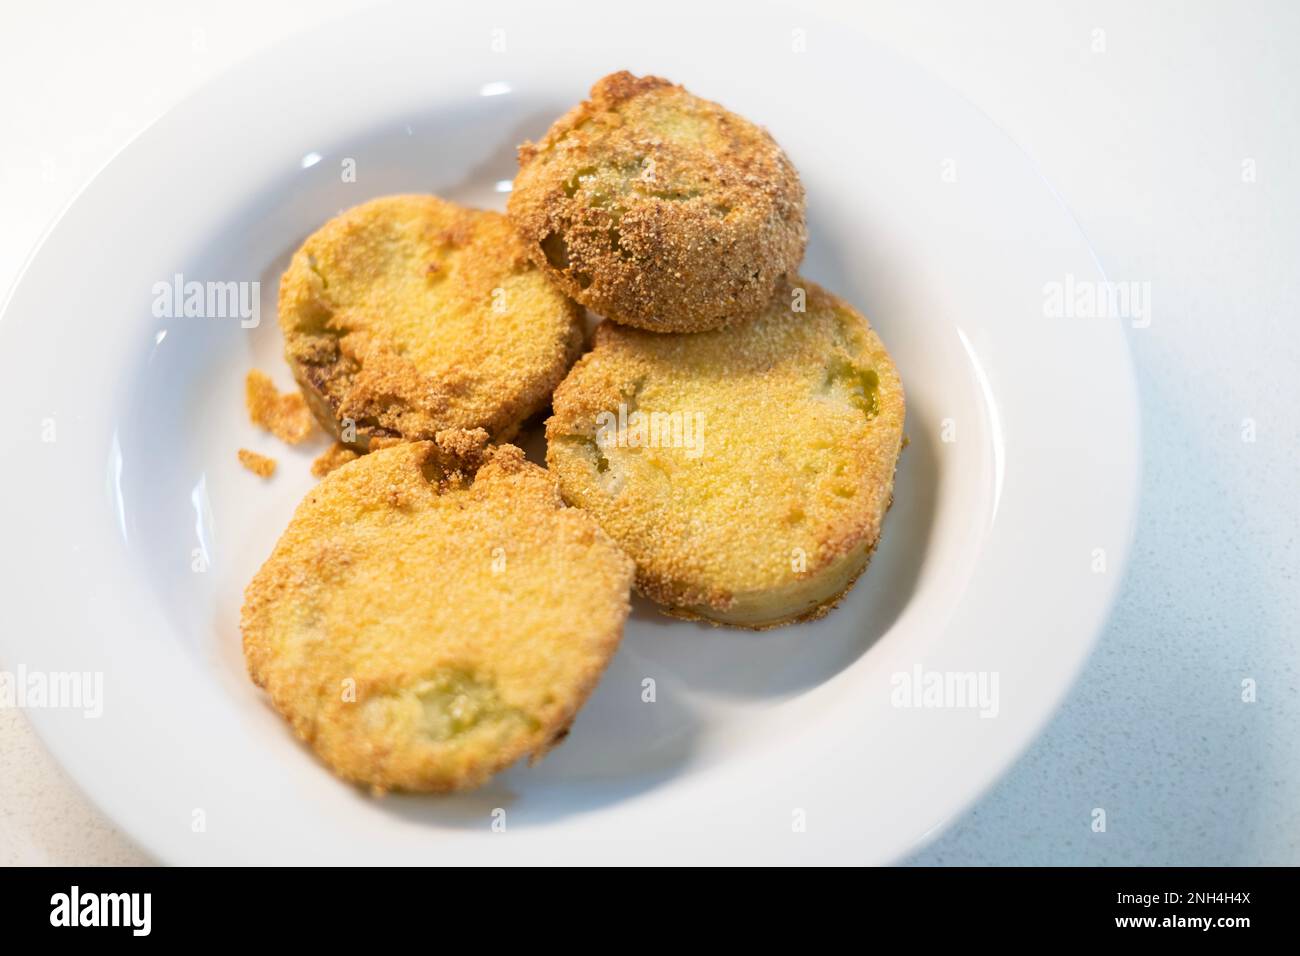 Fried green tomato slices, a way to use green tomatoes before they are lost due to a freeze. Kansas, USA. Stock Photo